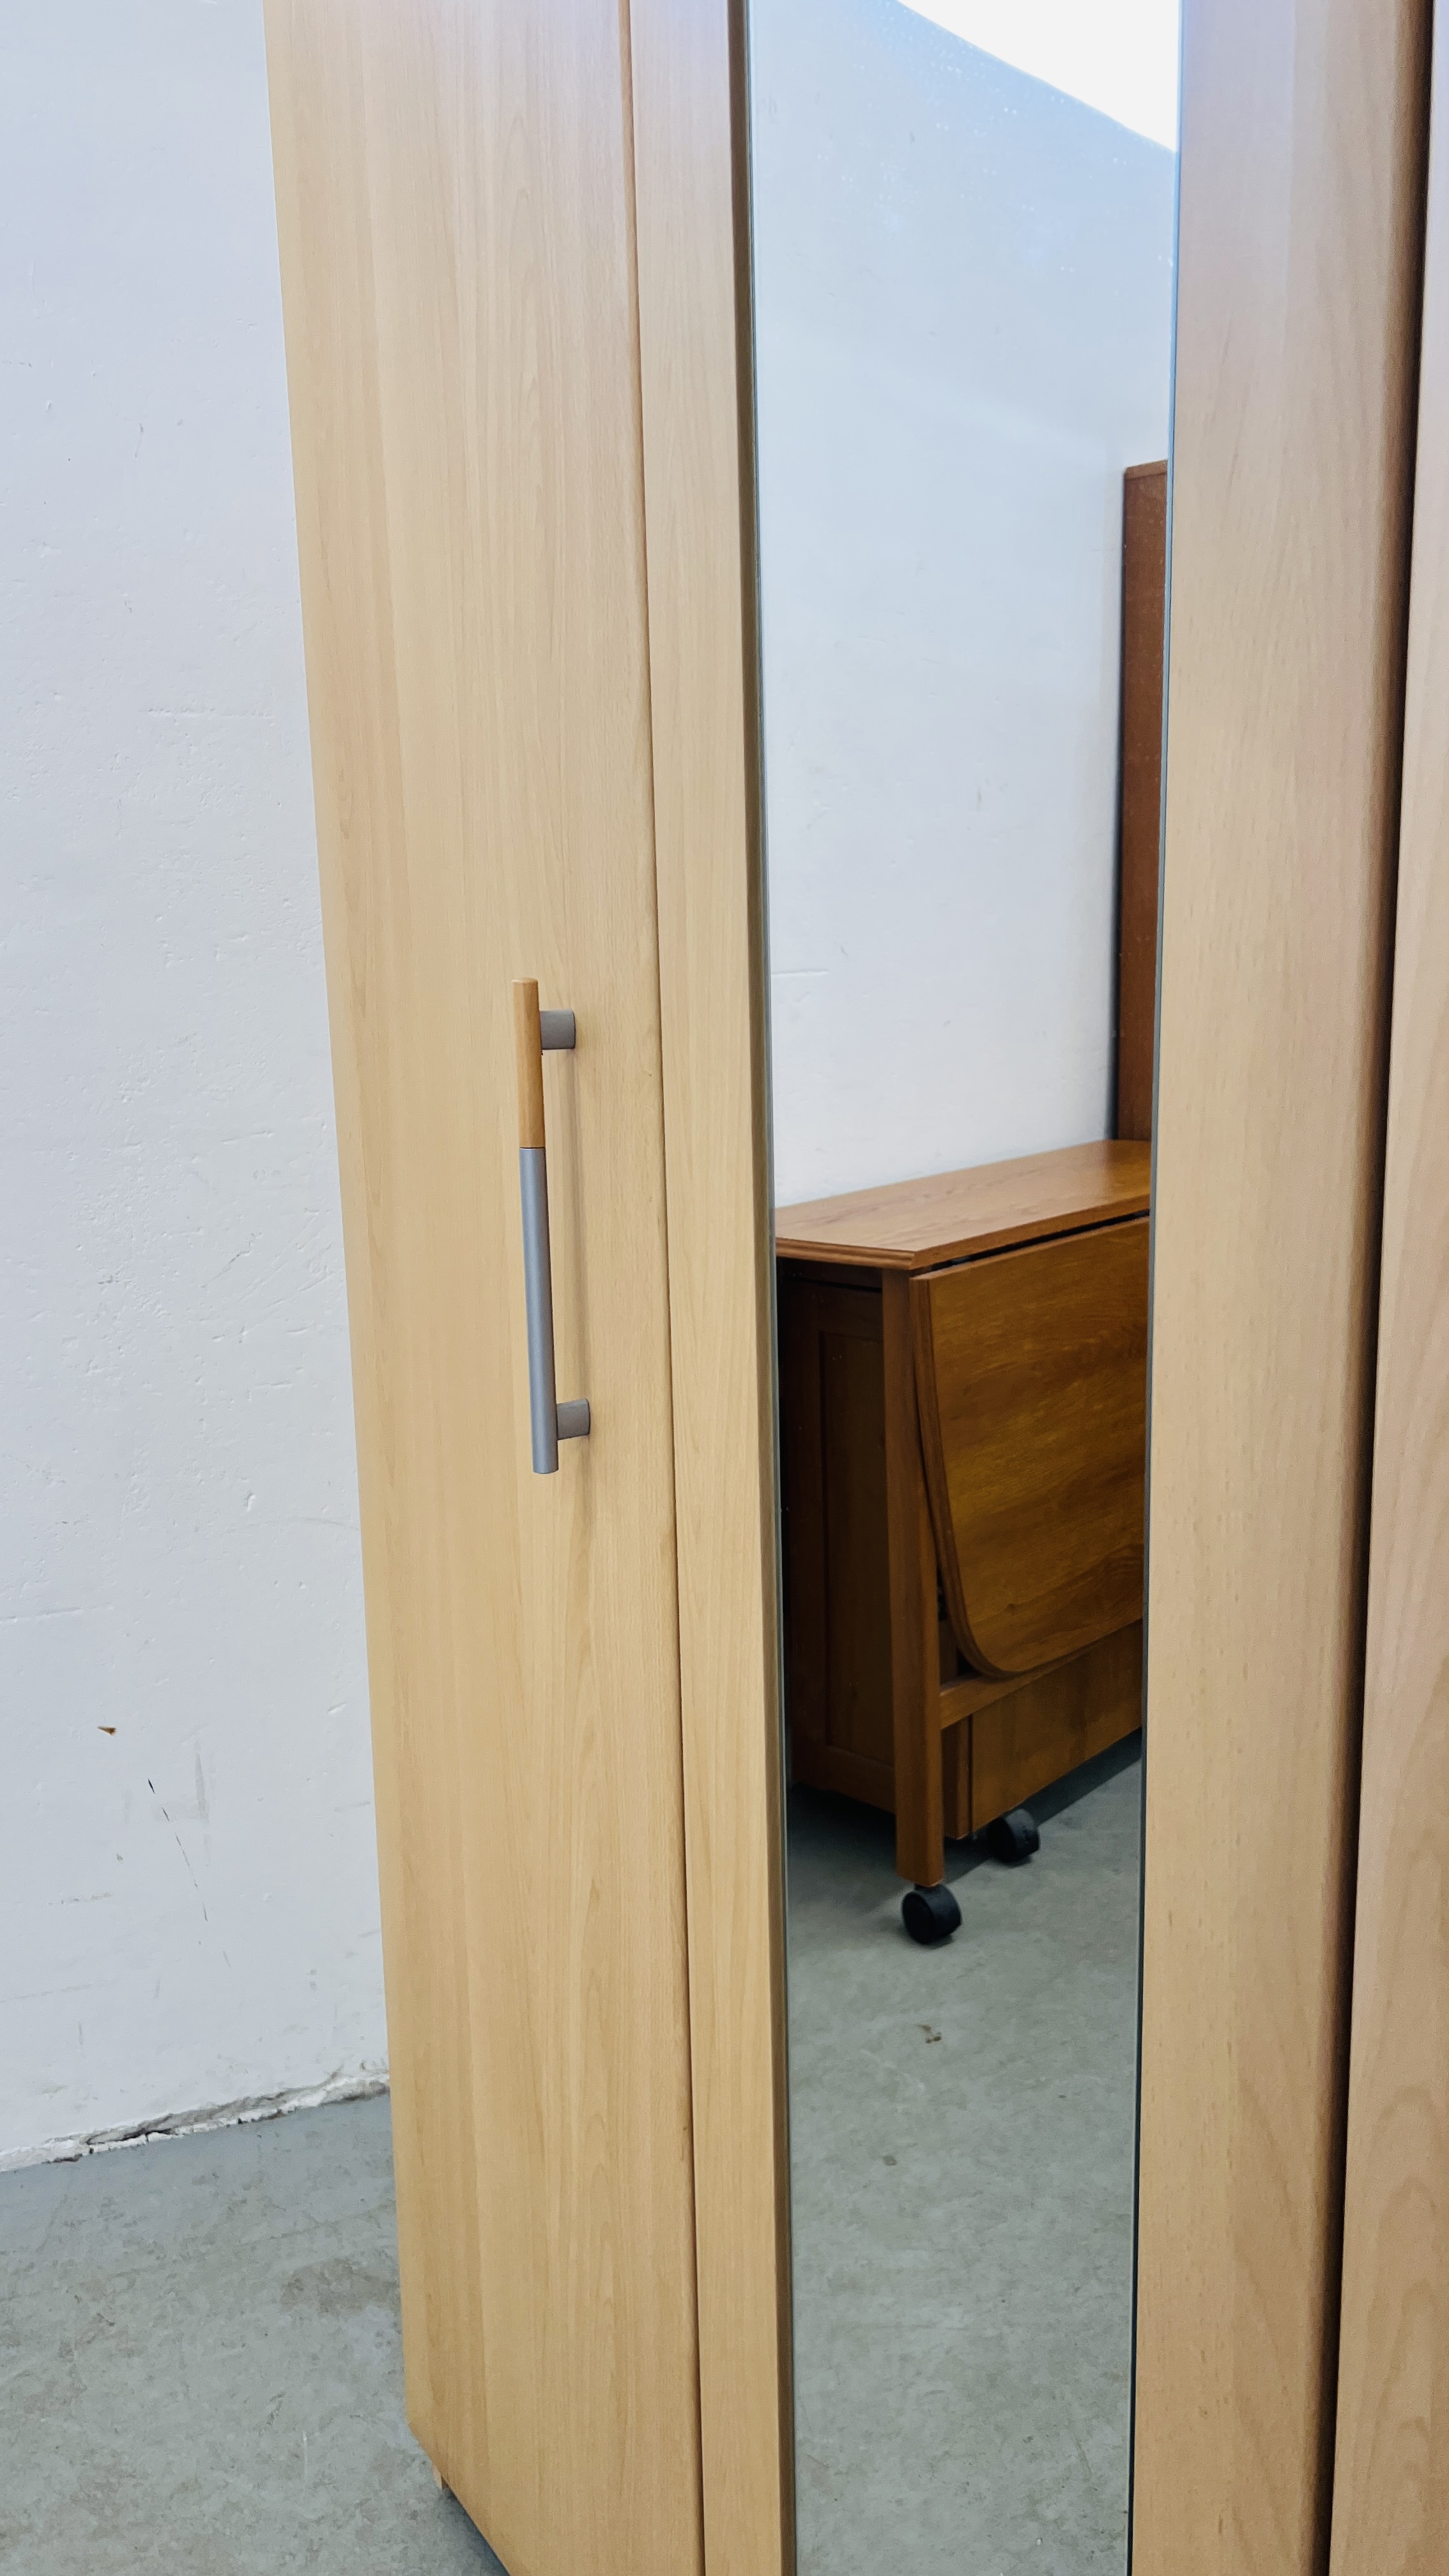 A MODERN BEECH WOOD FINISH TRIPLE WARDROBE WITH CENTRAL MIRRORED DOOR - W 115CM. D 52CM. H 185CM. - Image 3 of 10